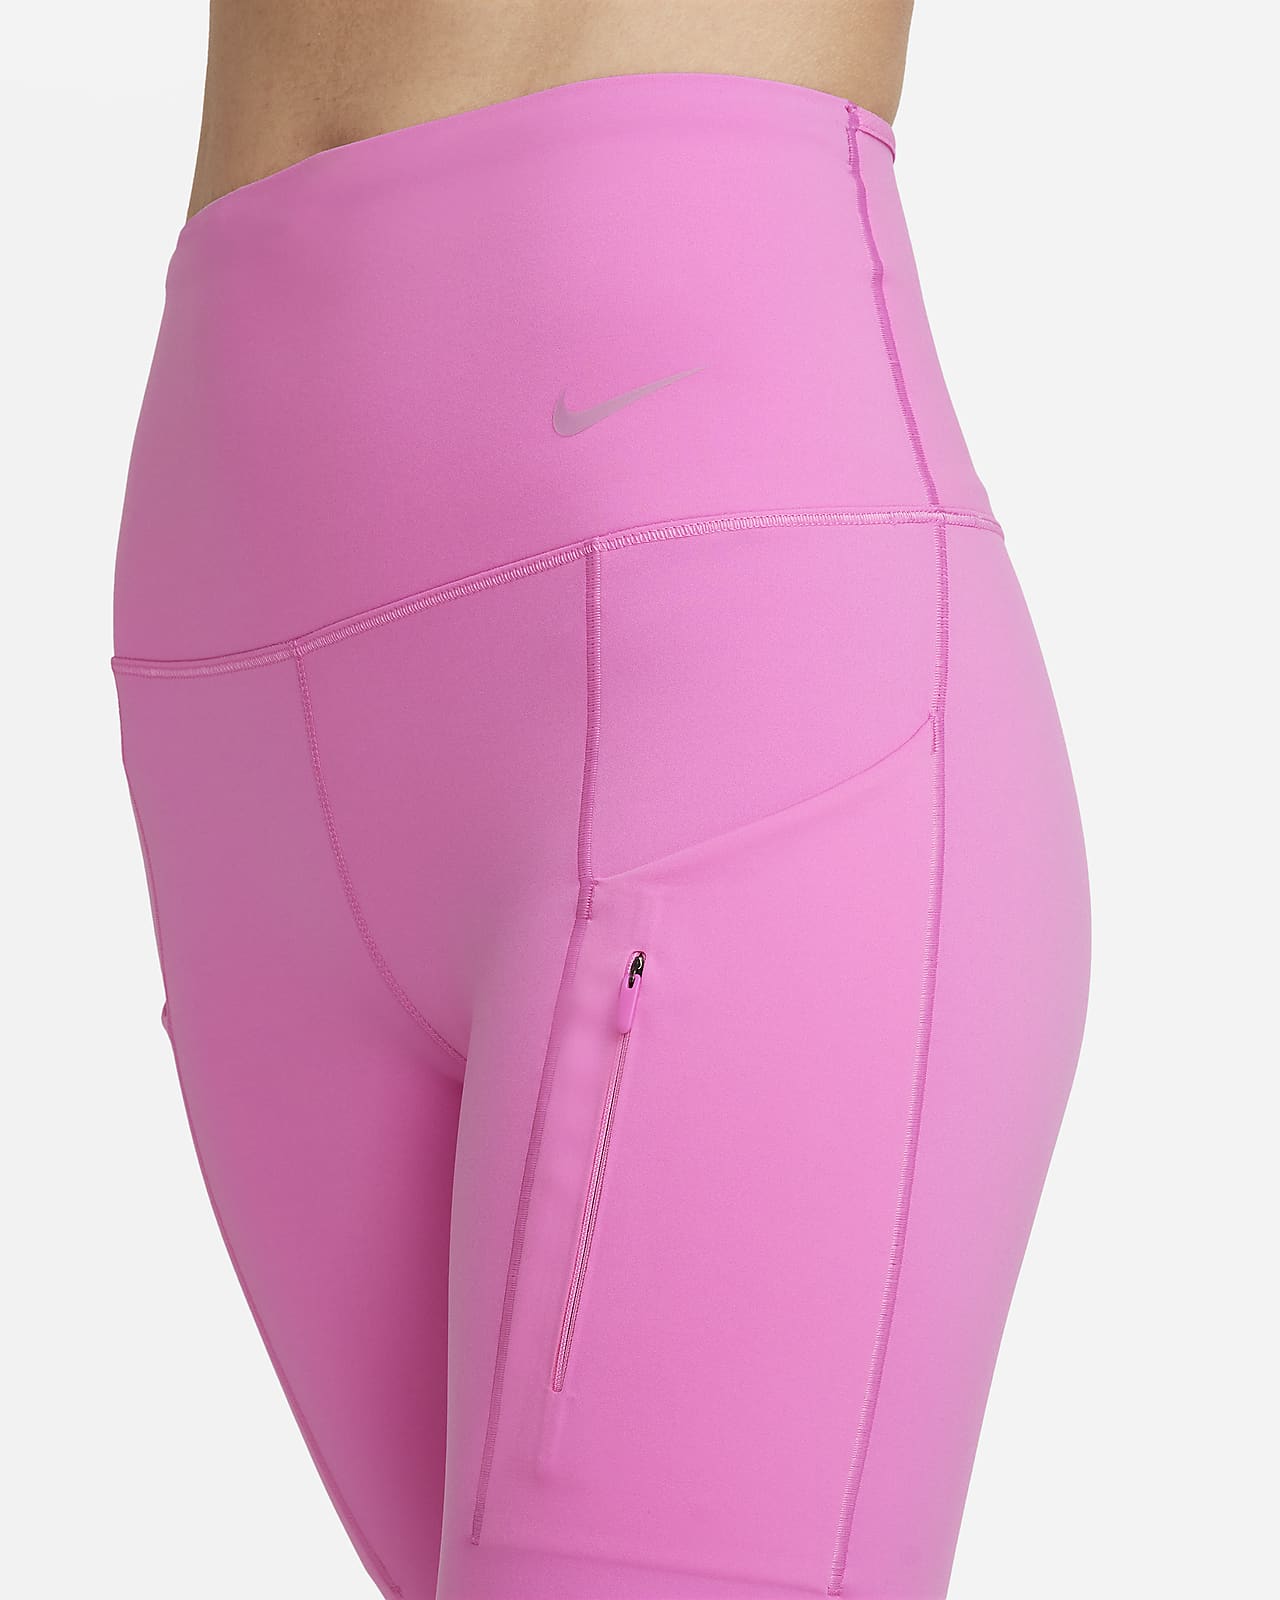 Nike Go Women's Firm-Support High-Waisted Leggings with Pockets